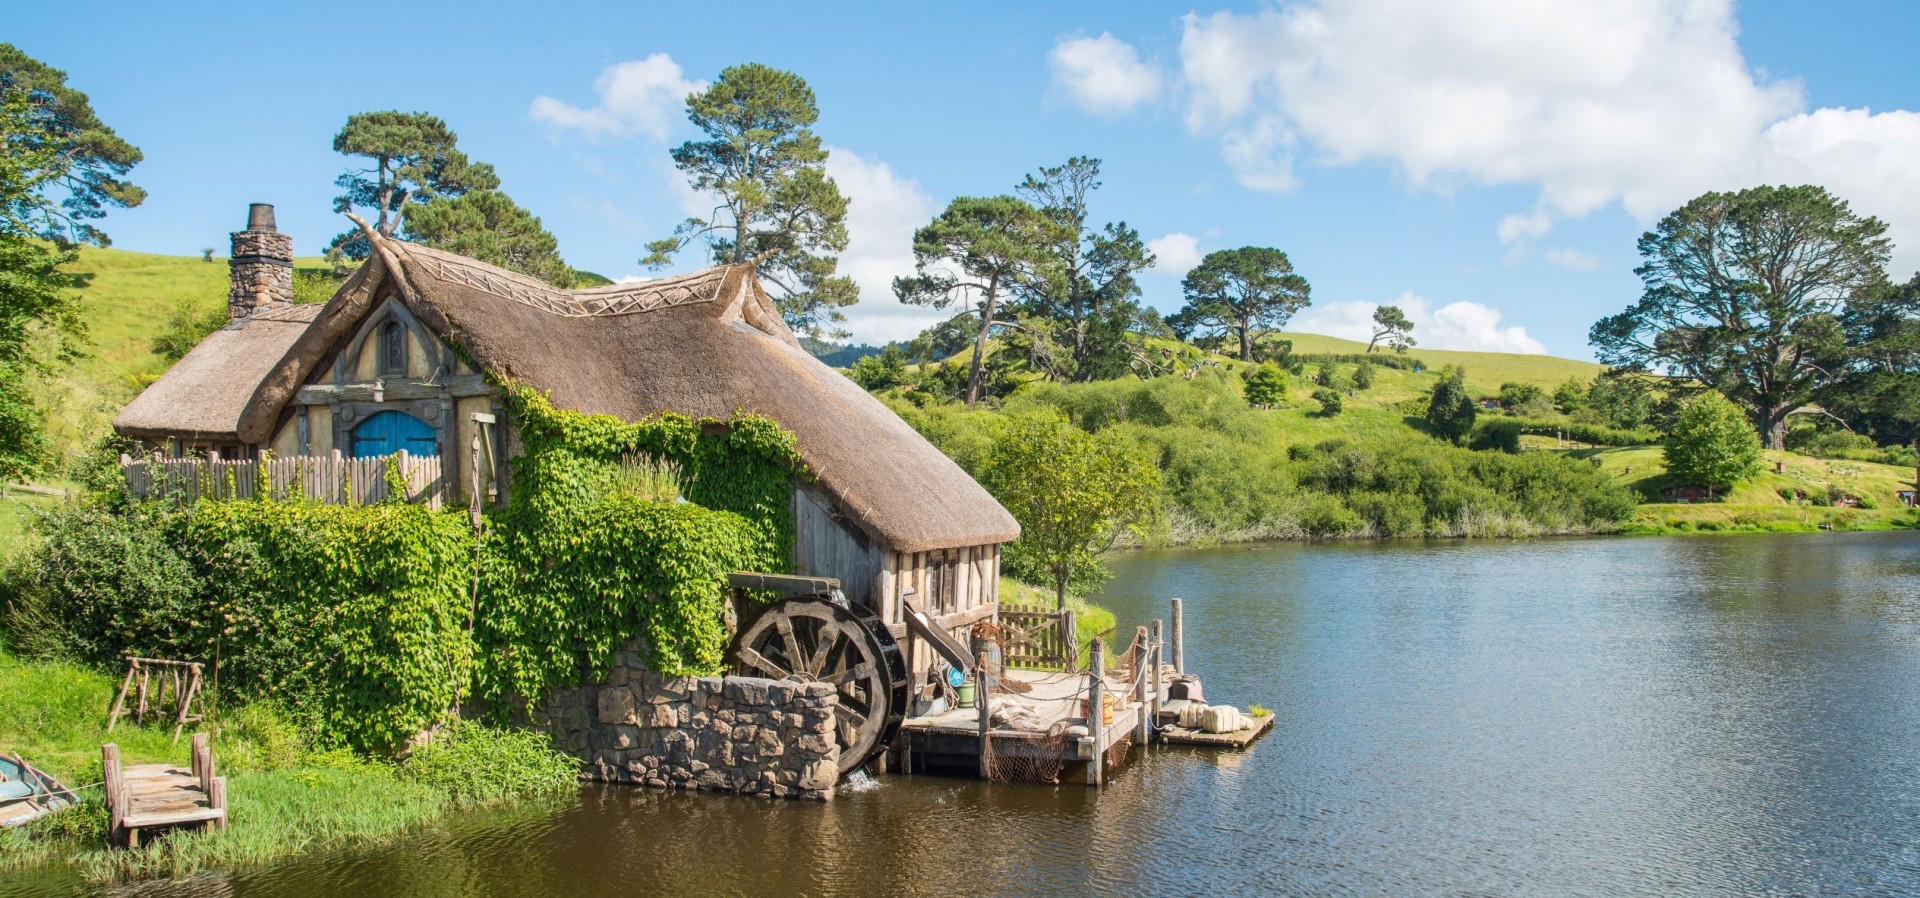 Travel West to Hobbiton and Experience Shire Enjoyment